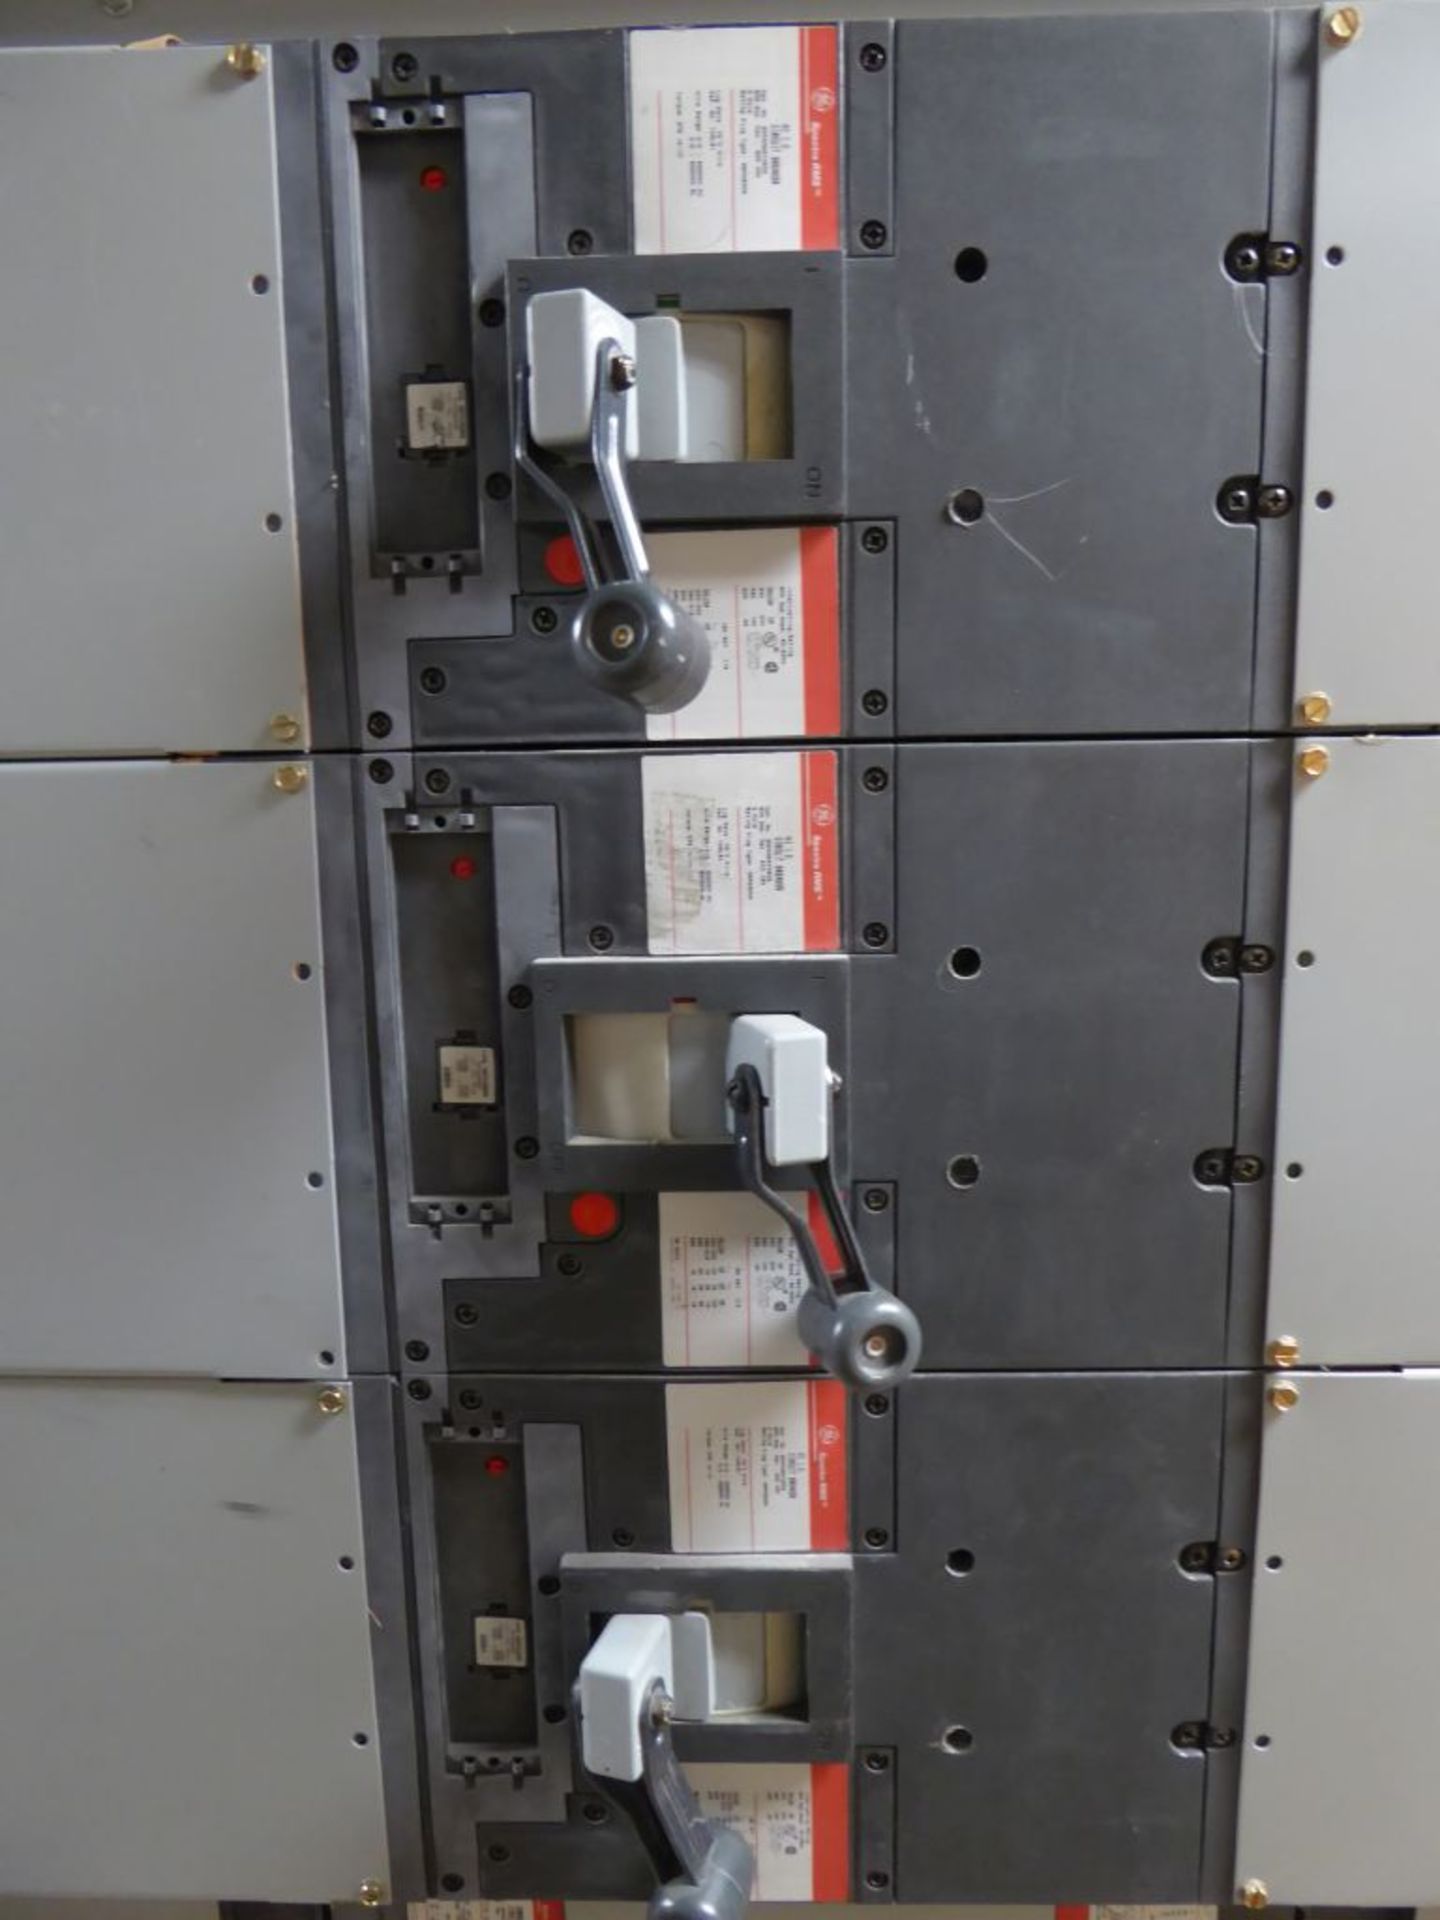 Charlotte, NC - GE 1600A Spectra Series Switchboard - Image 6 of 9